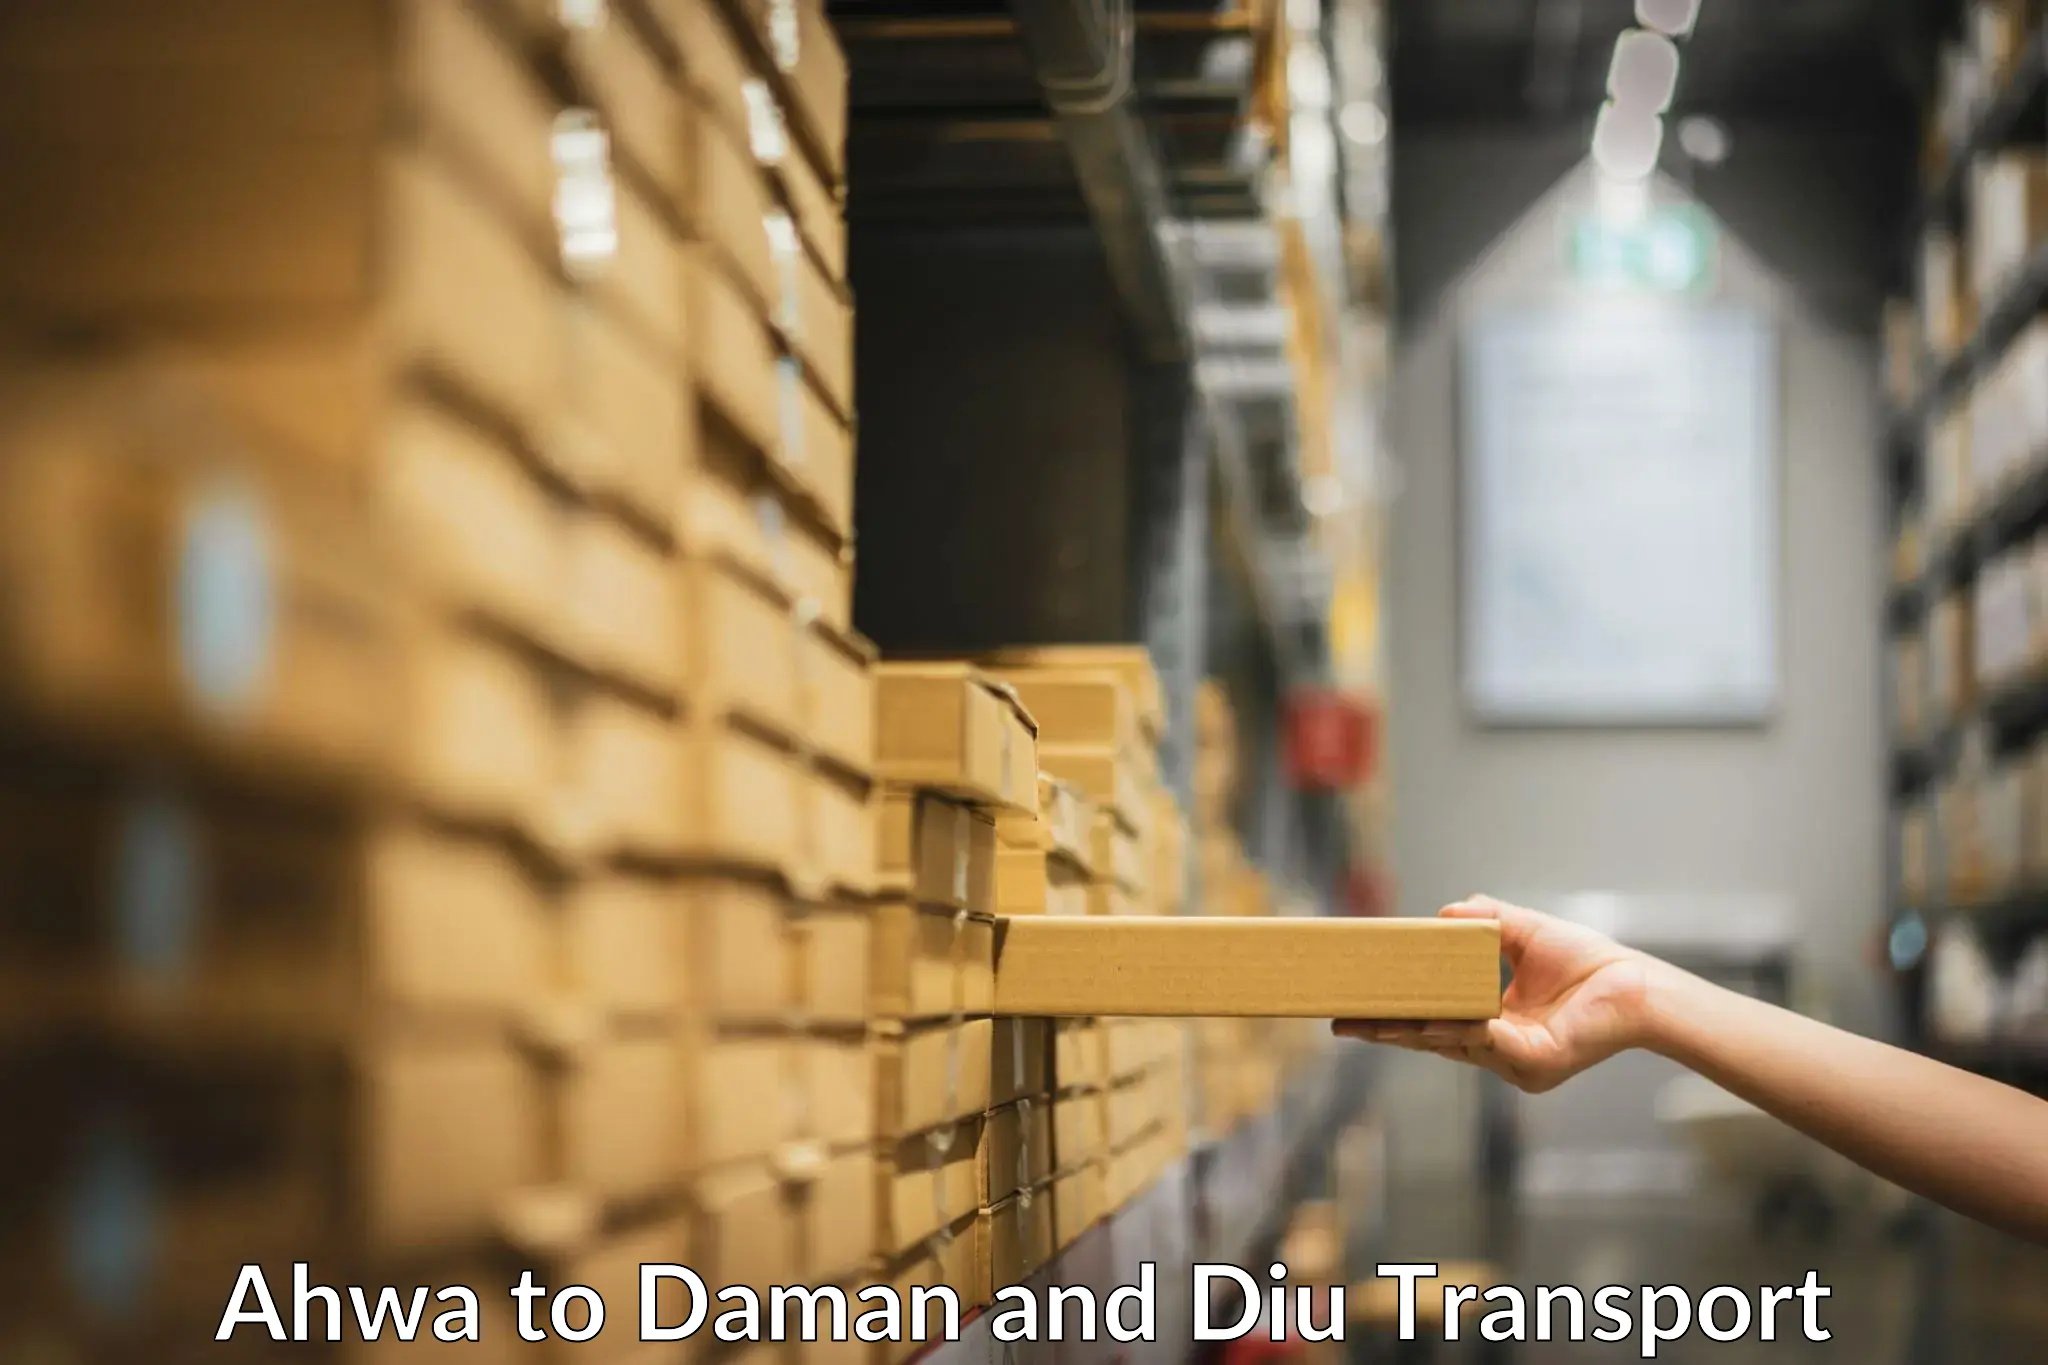 Truck transport companies in India Ahwa to Daman and Diu